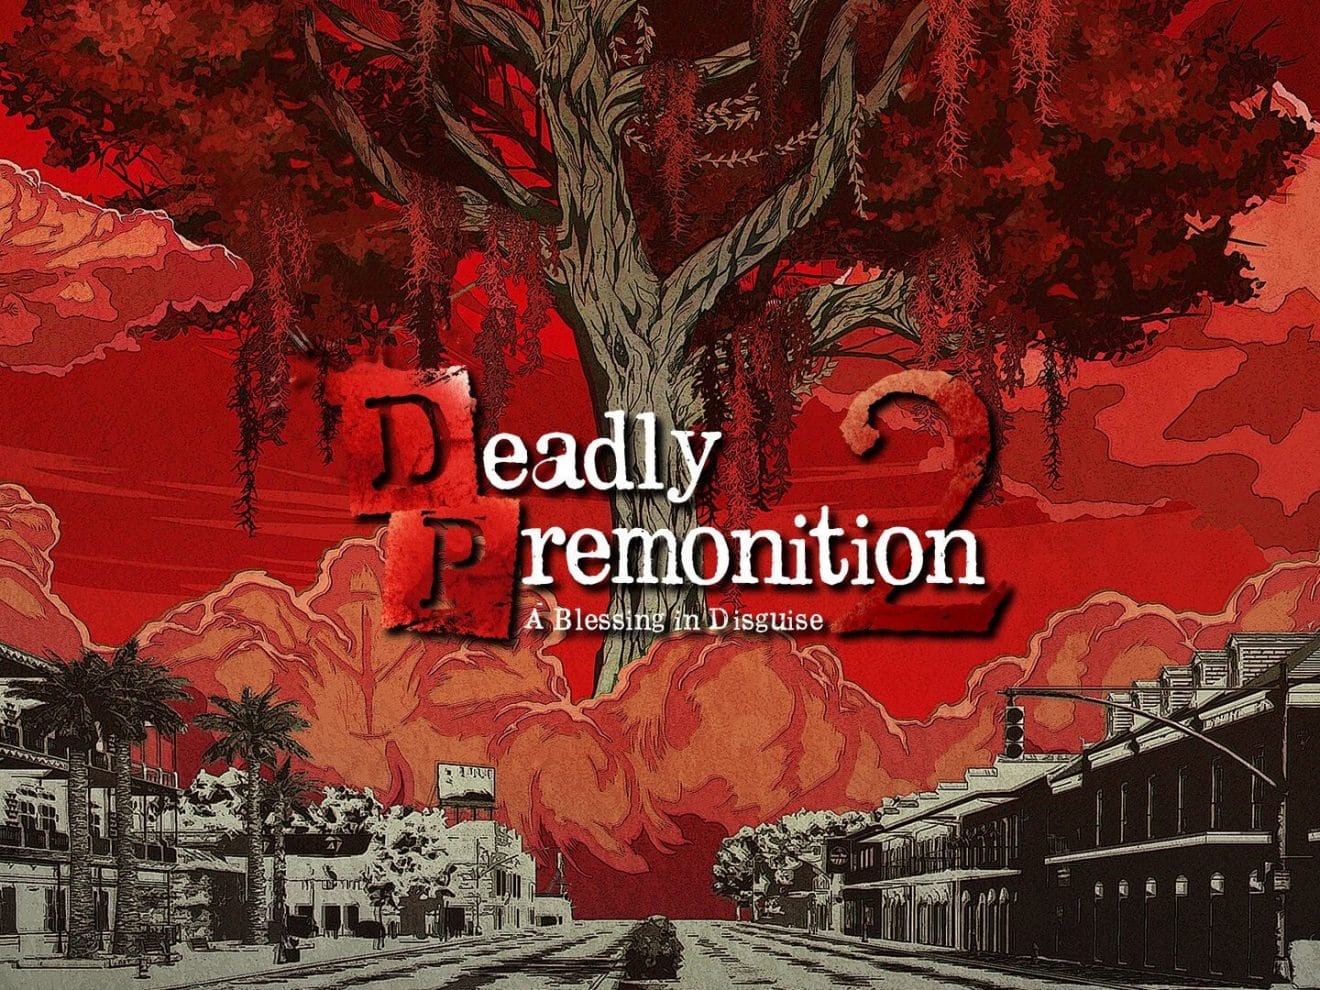 deadly premonition 2 pc review download